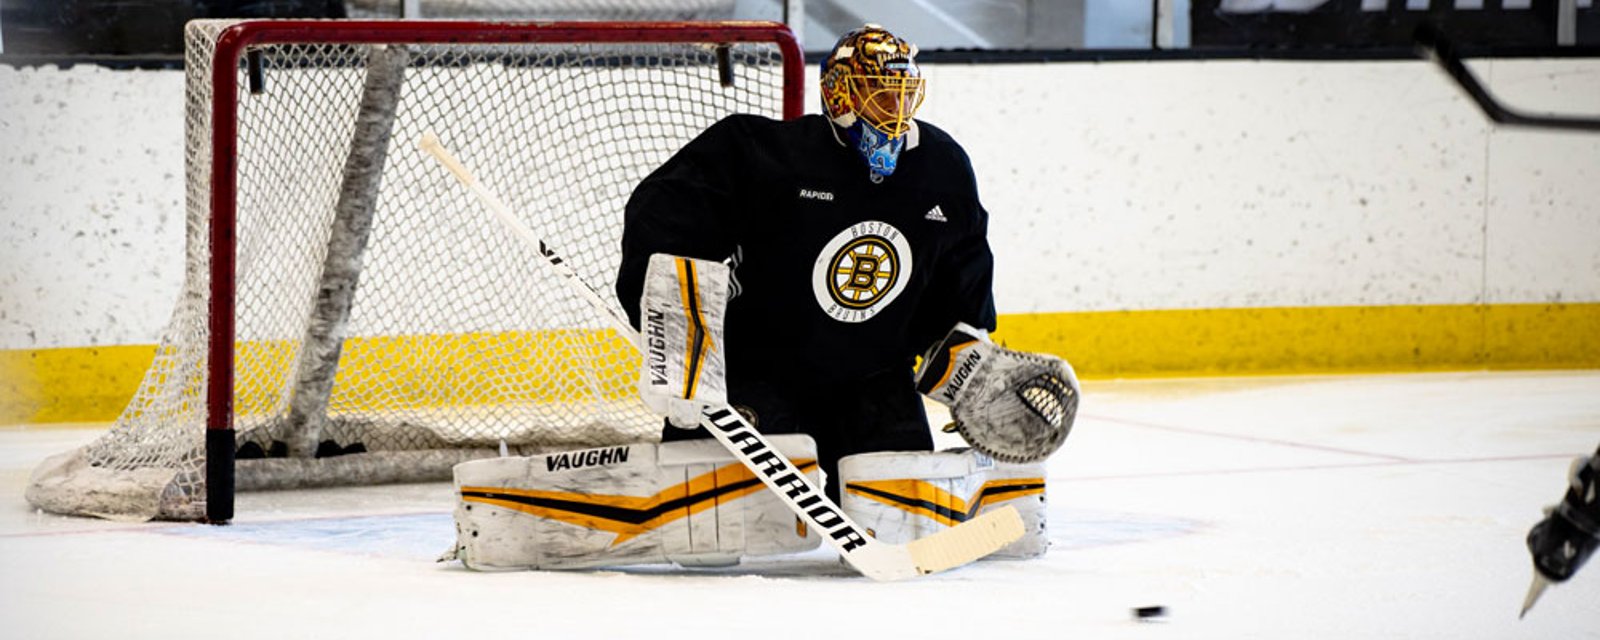 Tuukka Rask re-joins the Bruins with Jeremy Swayman out of the lineup